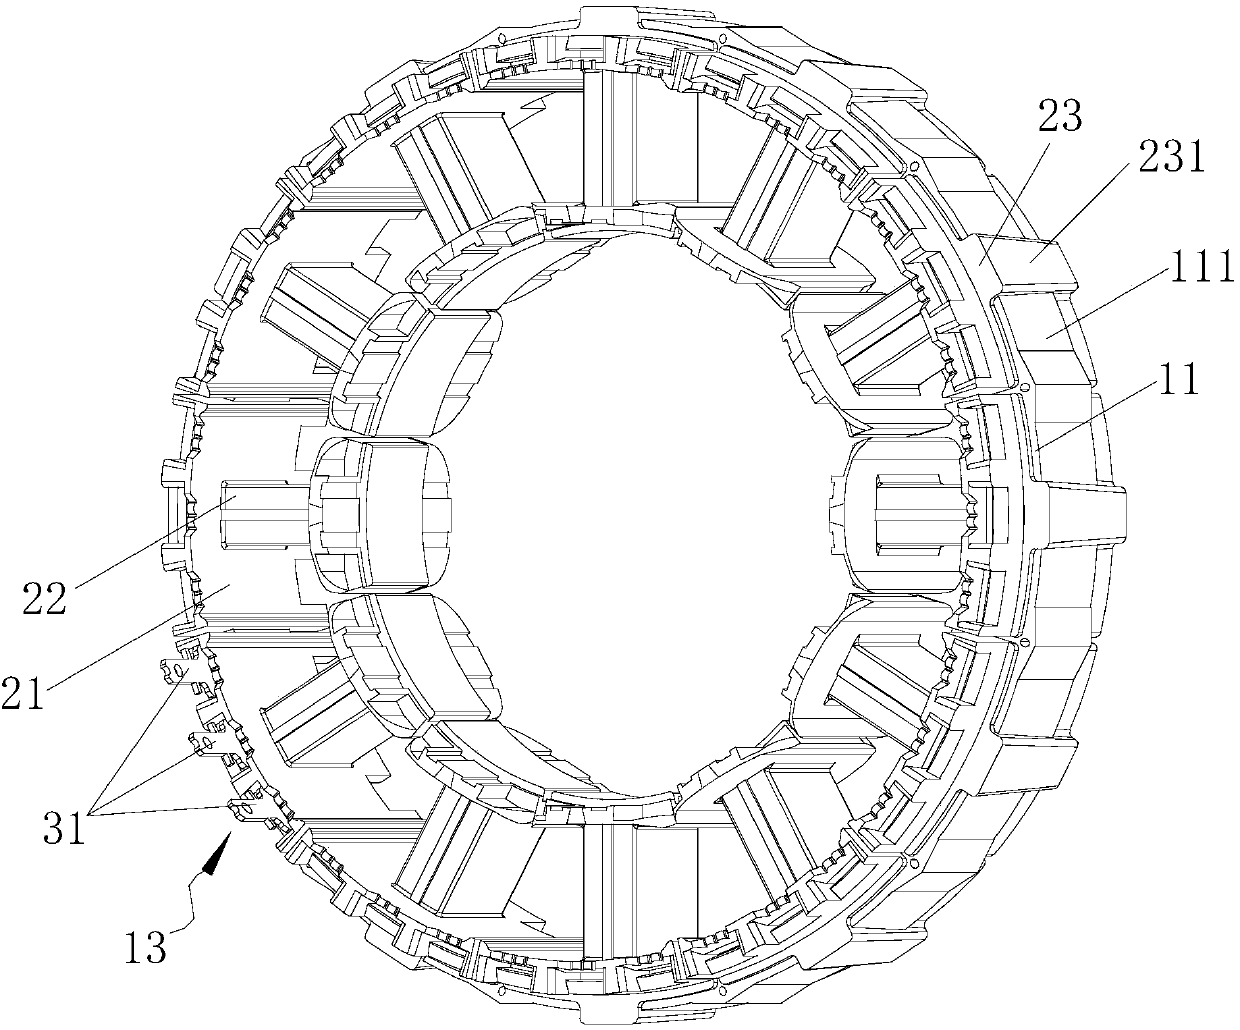 A stator assembly and its manufacturing method